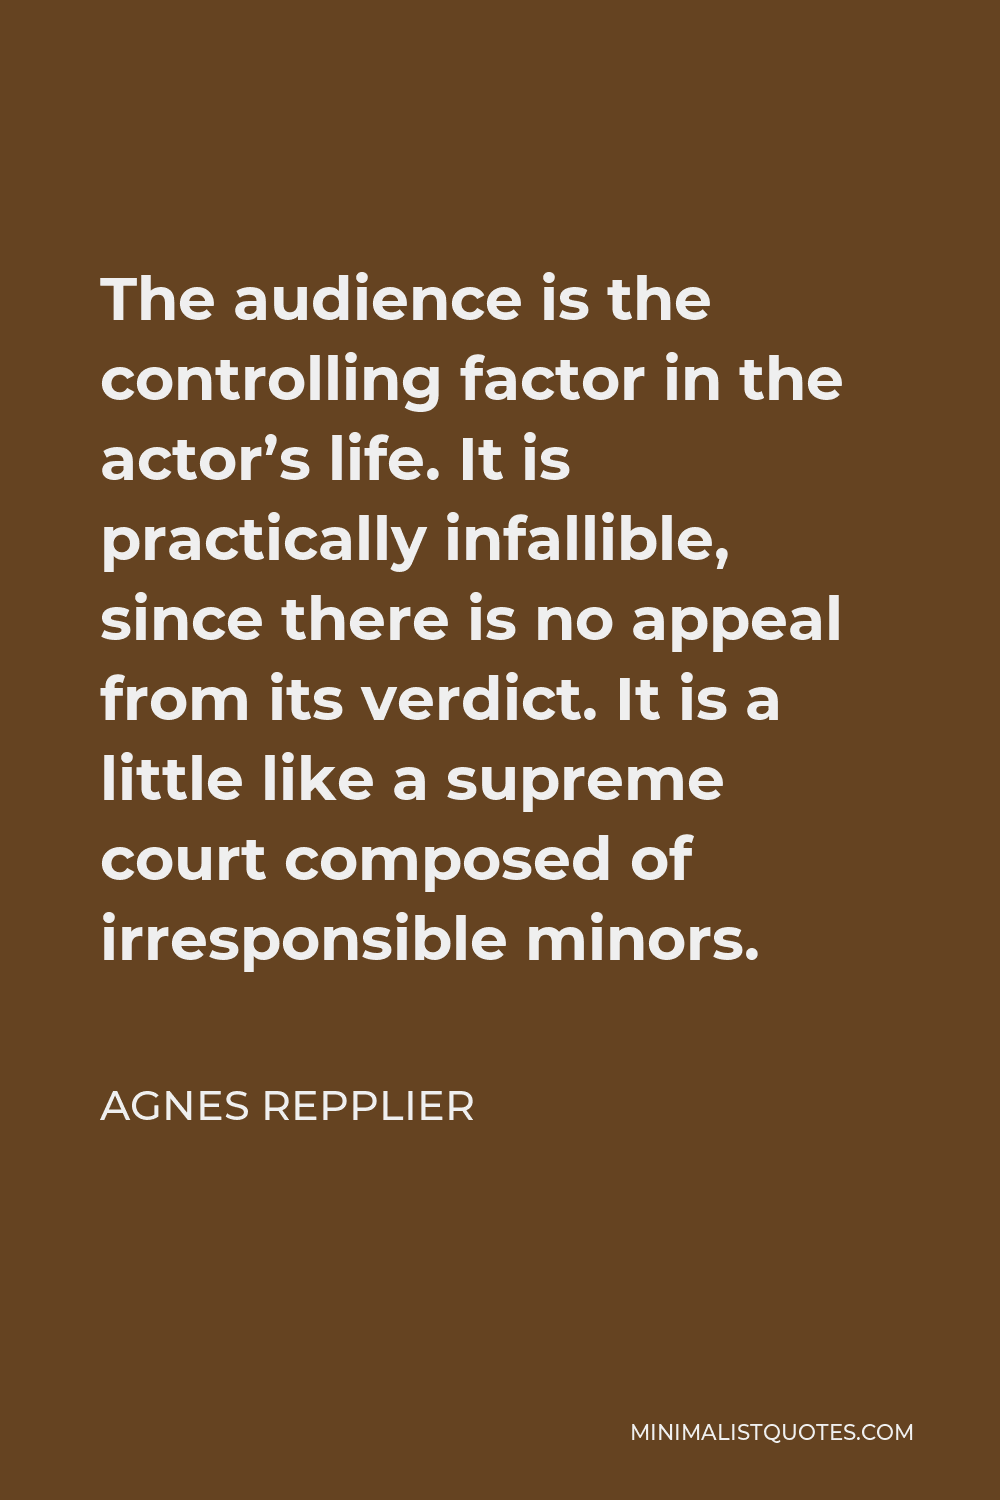 Agnes Repplier Quote - The audience is the controlling factor in the actor’s life. It is practically infallible, since there is no appeal from its verdict. It is a little like a supreme court composed of irresponsible minors.